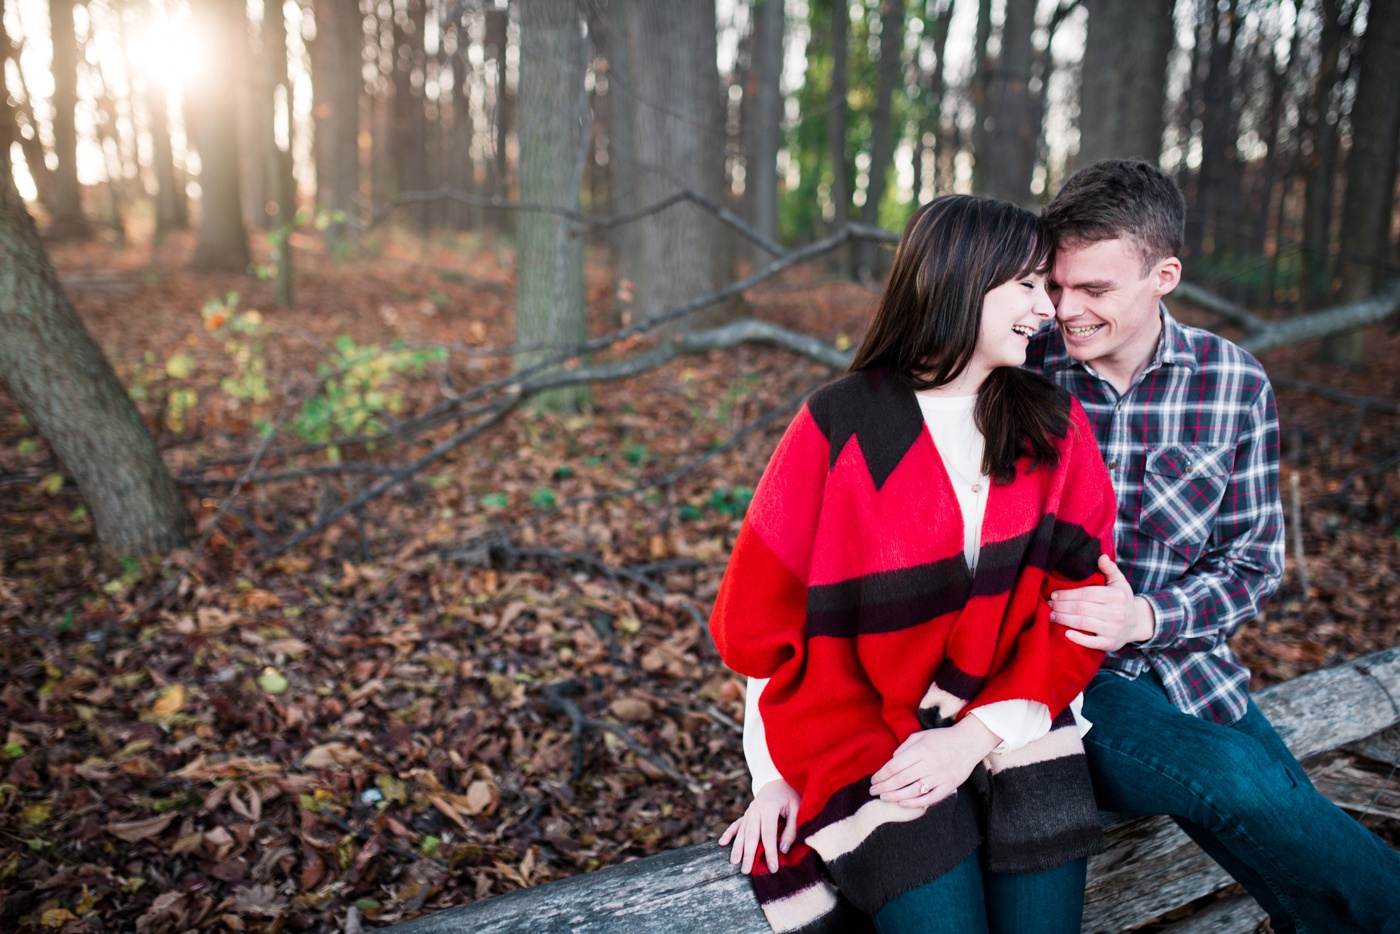 20 - Katie + David - Valley Forge Engagement Session - King of Prussia Pennsylvania Wedding Photographer - Alison Dunn Photography photo